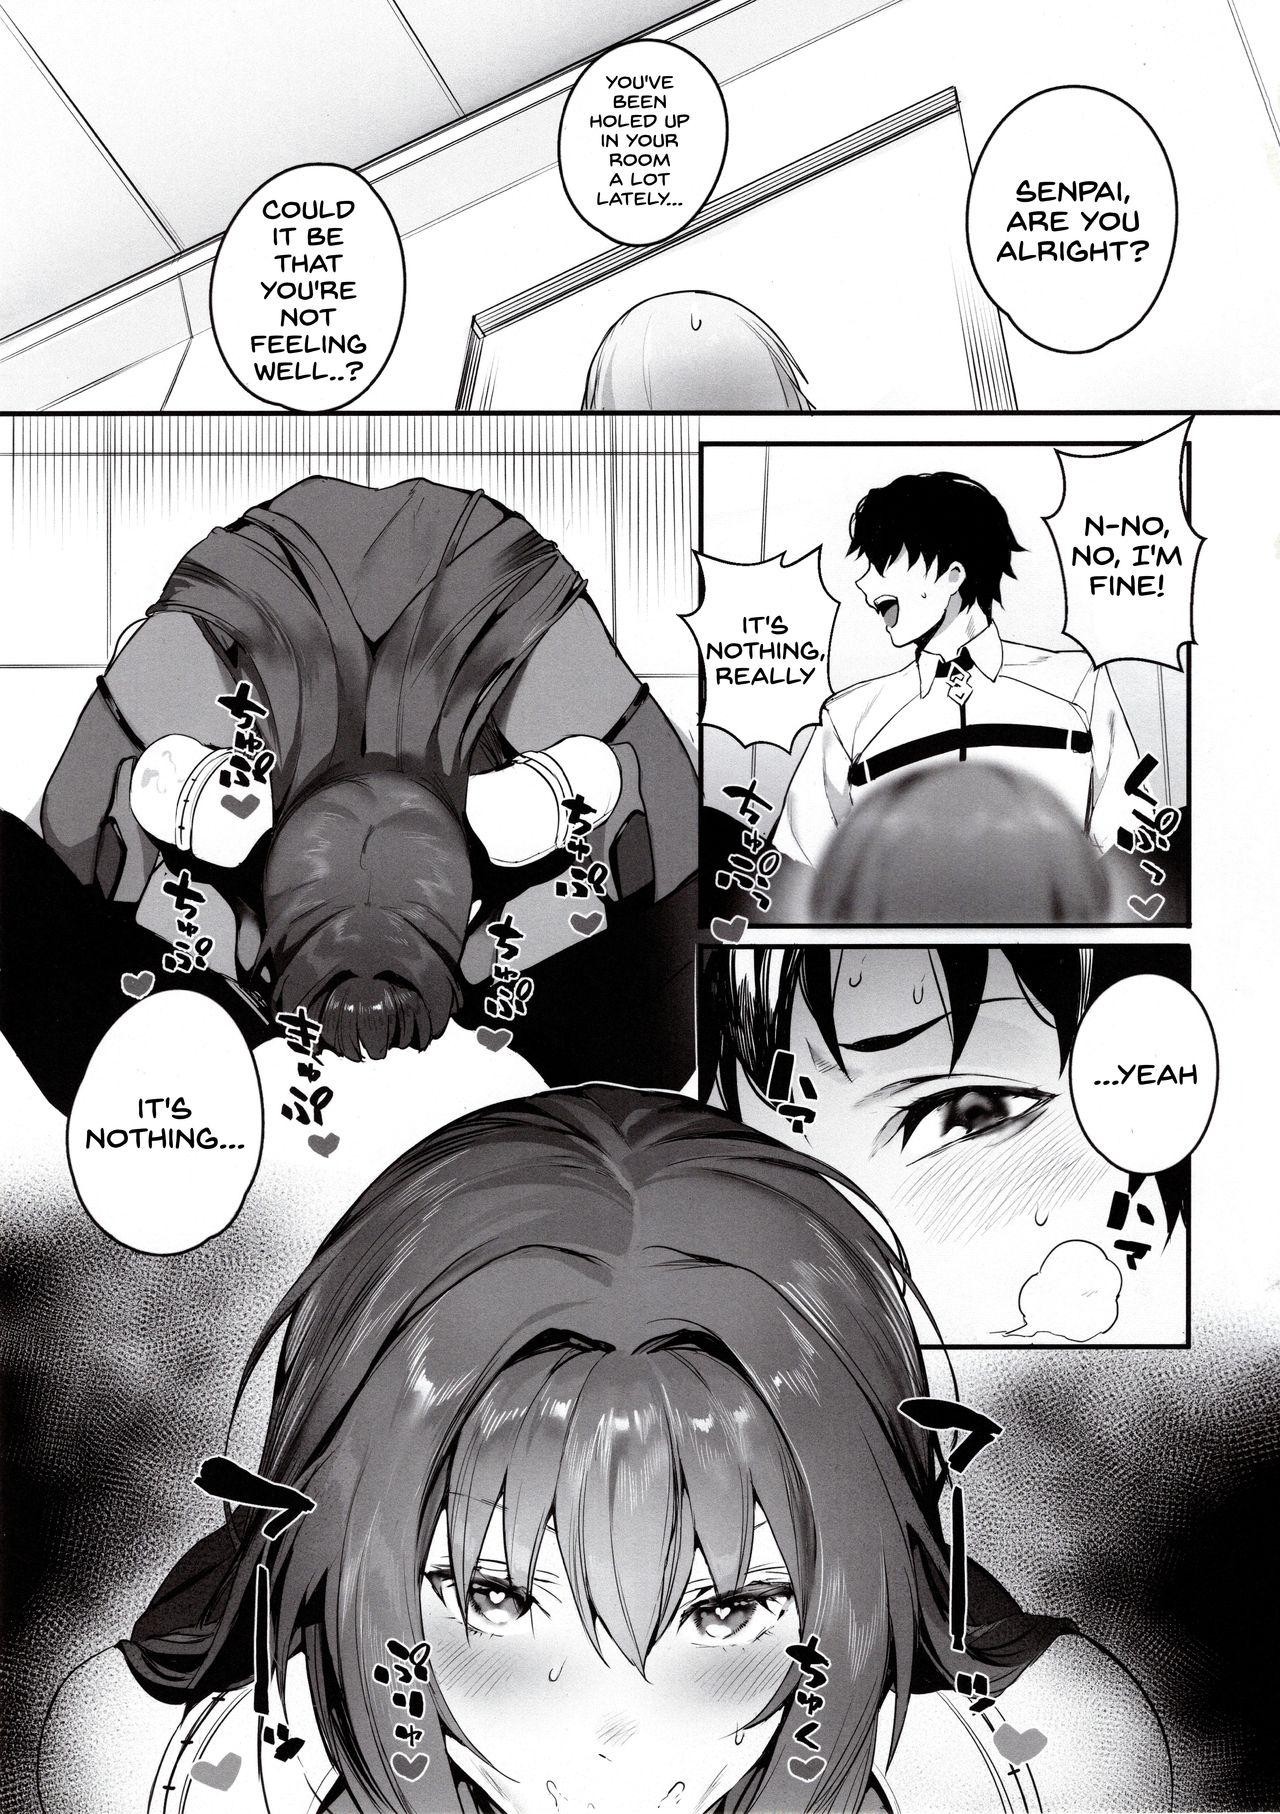 Hot Cunt MOVE ON UP - Fate grand order Bj - Page 2